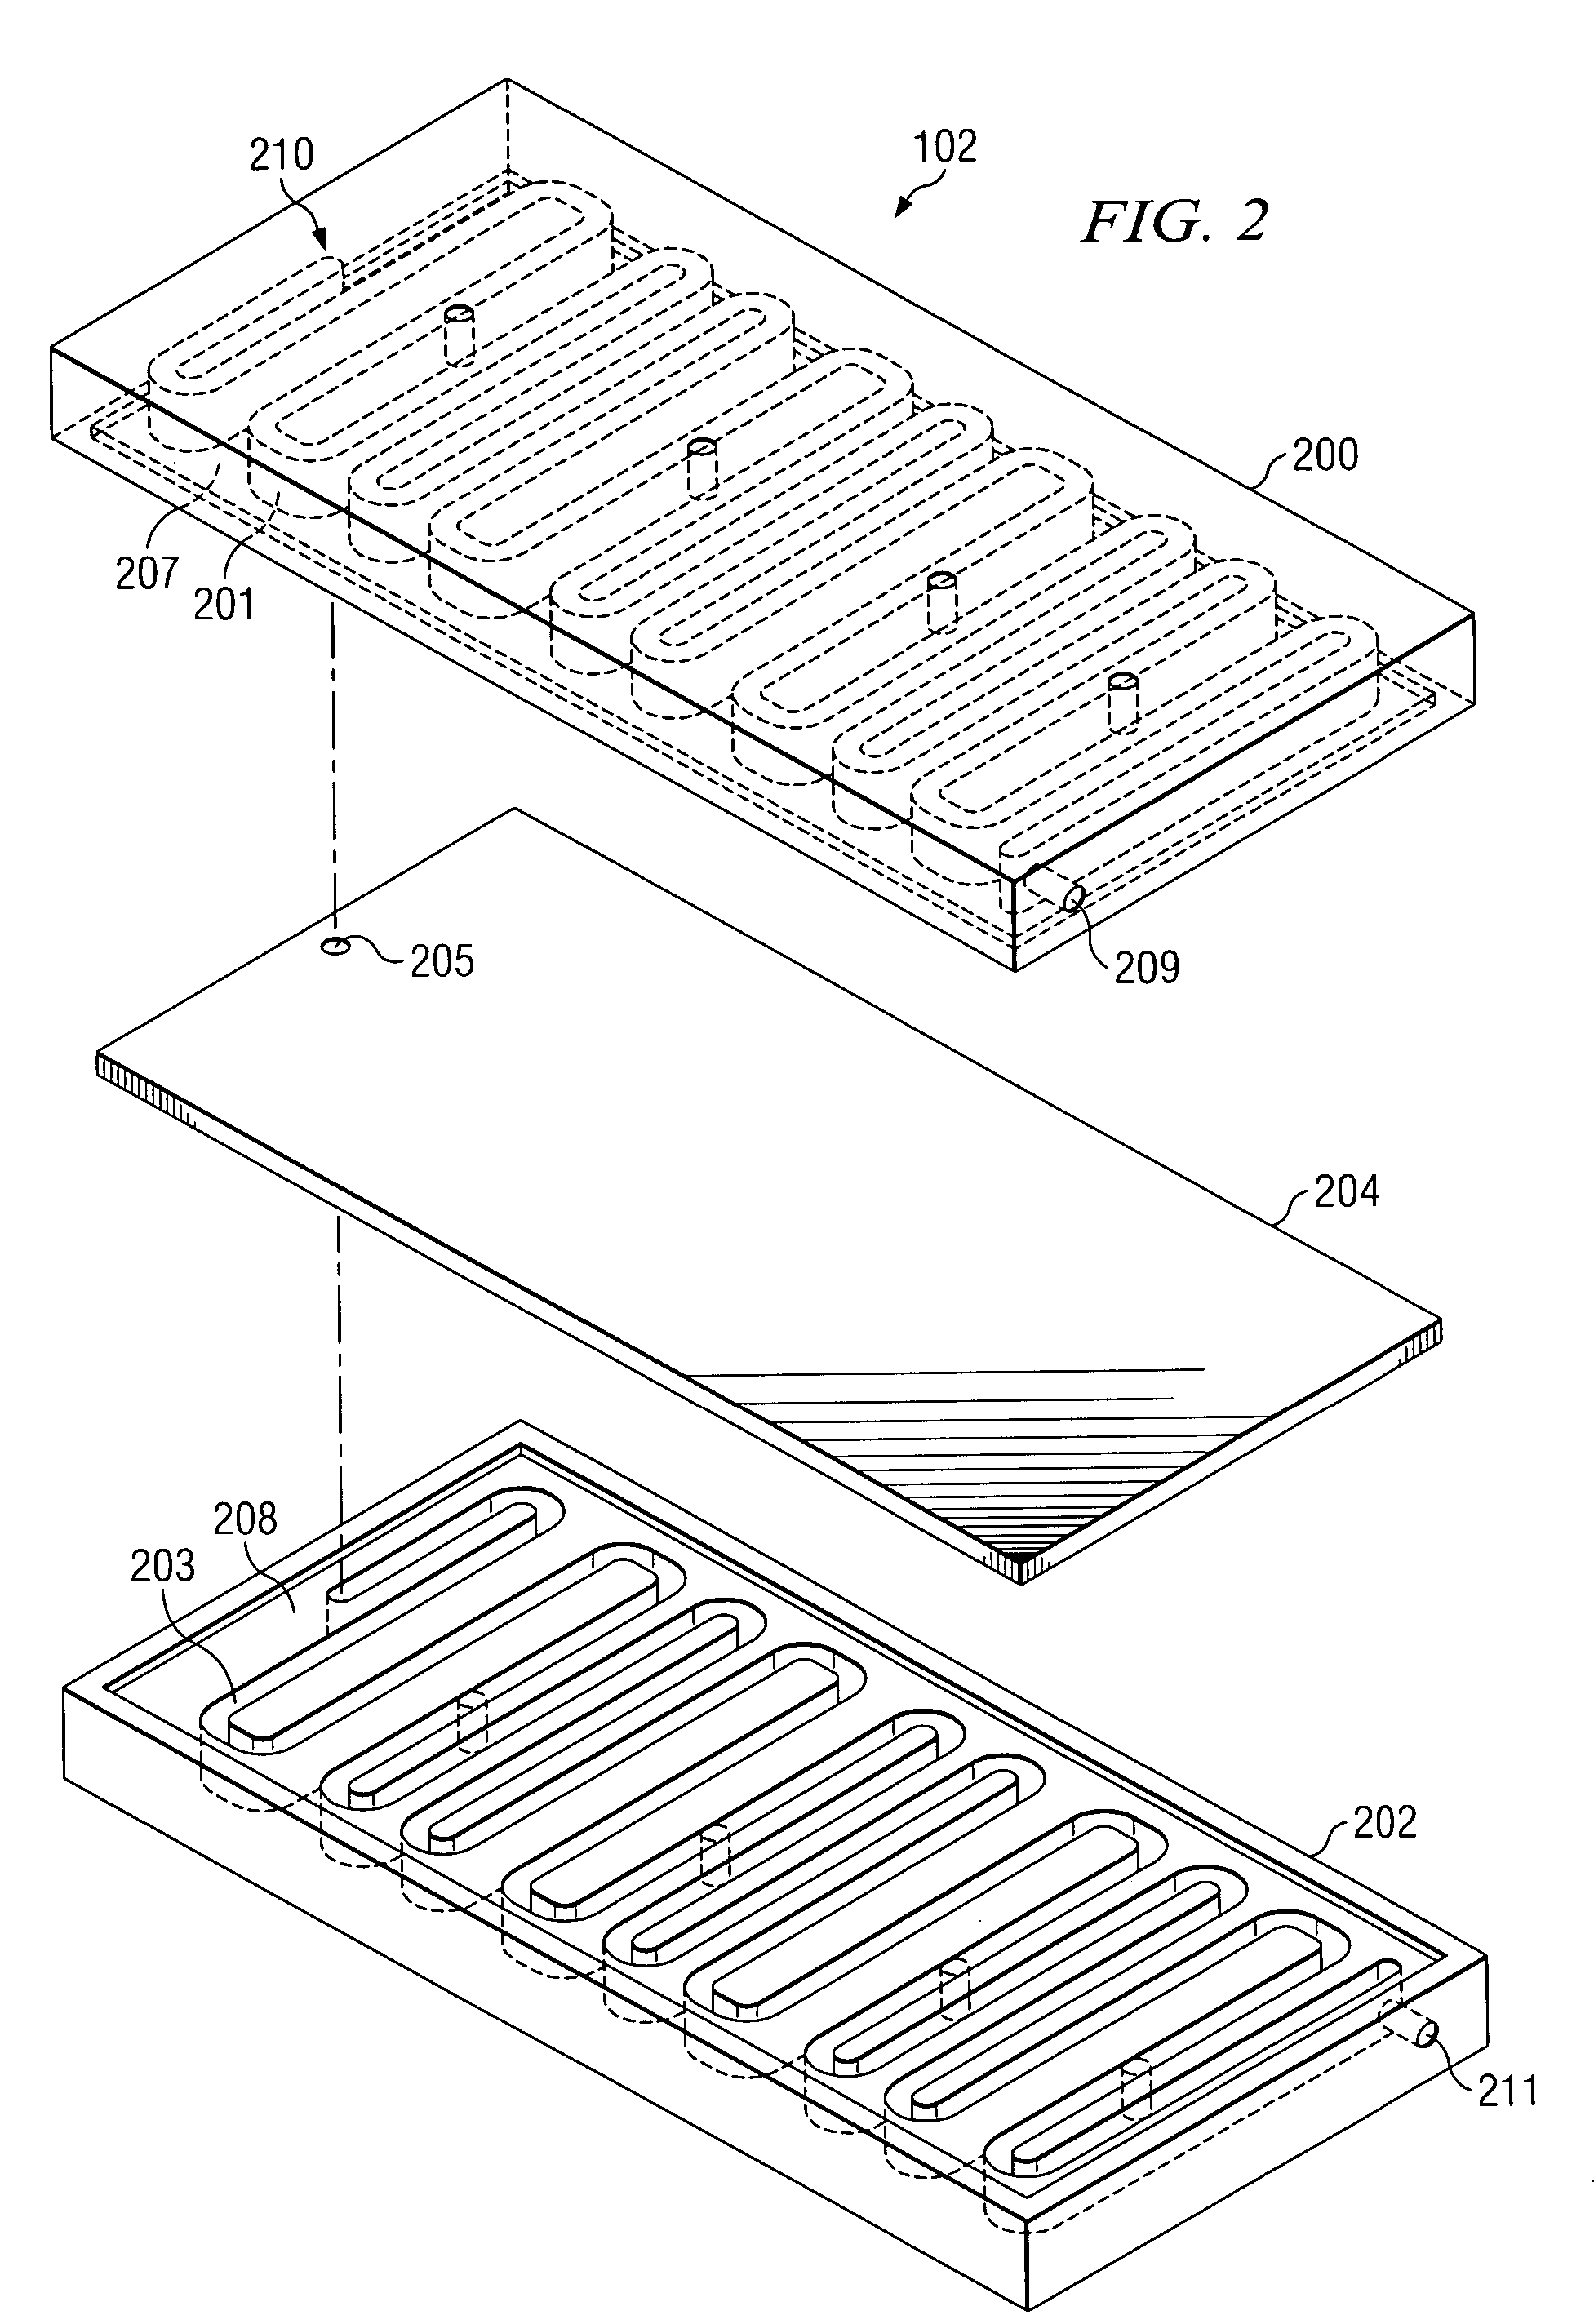 Air-conditioning and heating system utilizing thermo-electric solid state devices